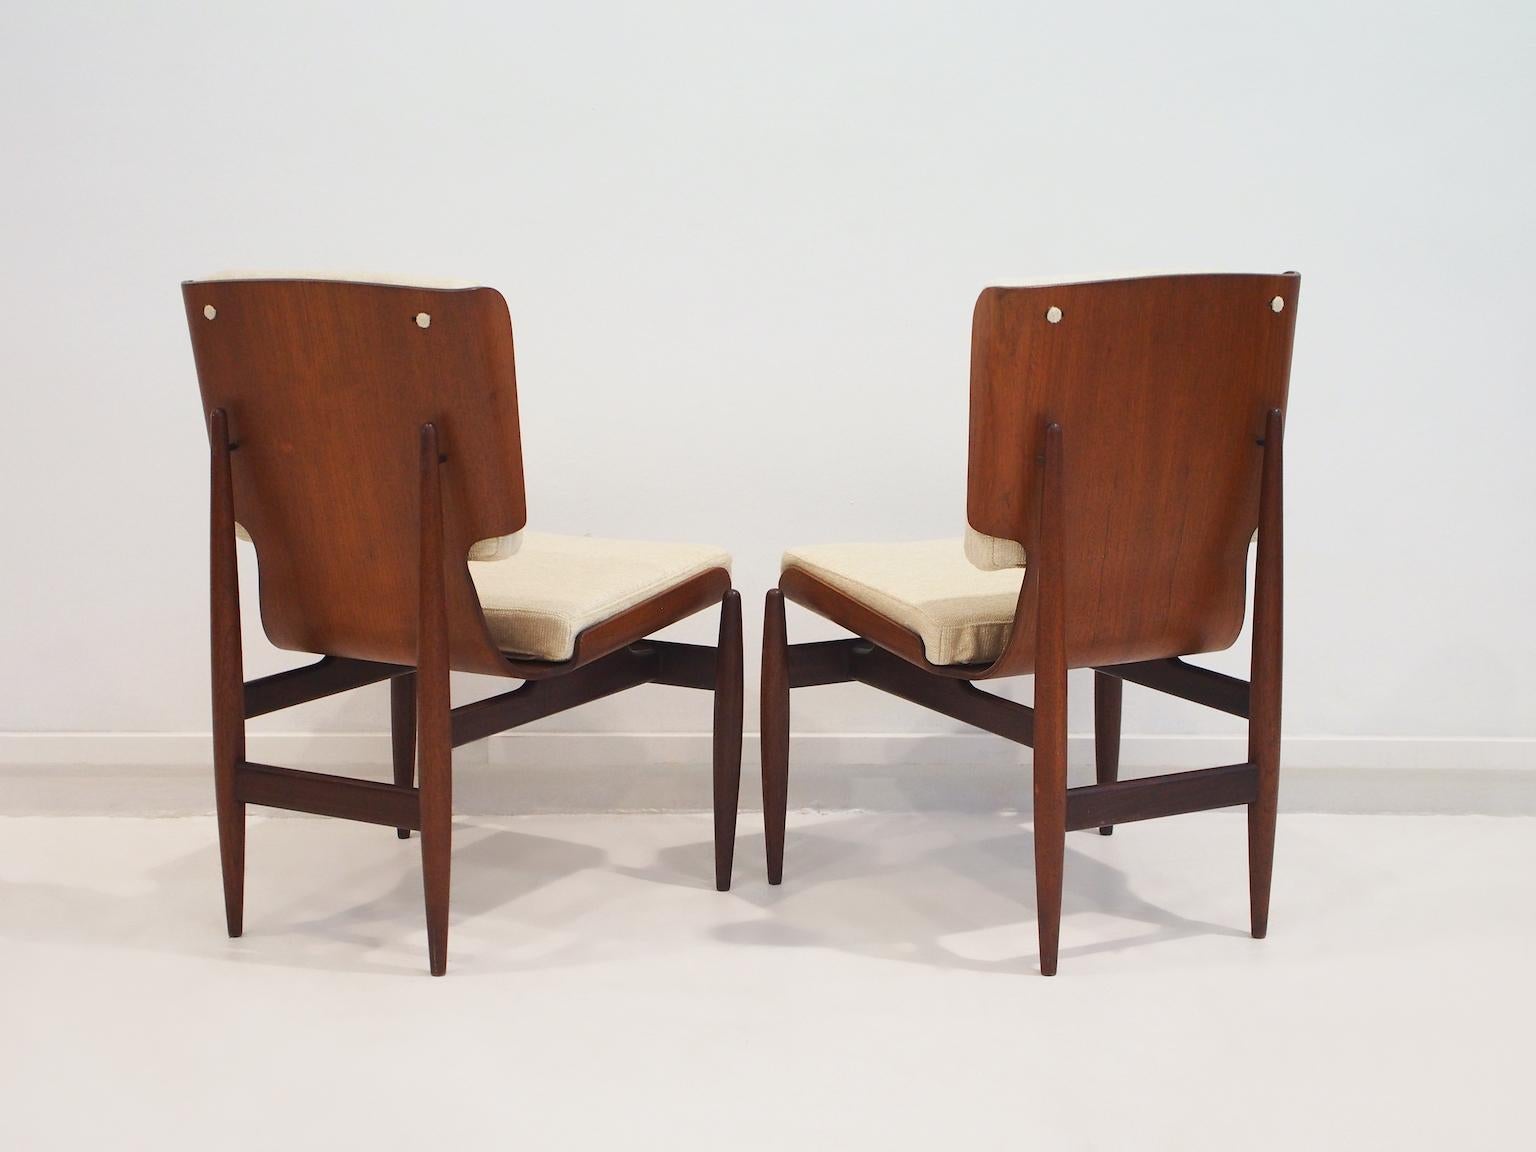 Pair of Italian Modernist Wooden Side Chairs by Barovero For Sale 3